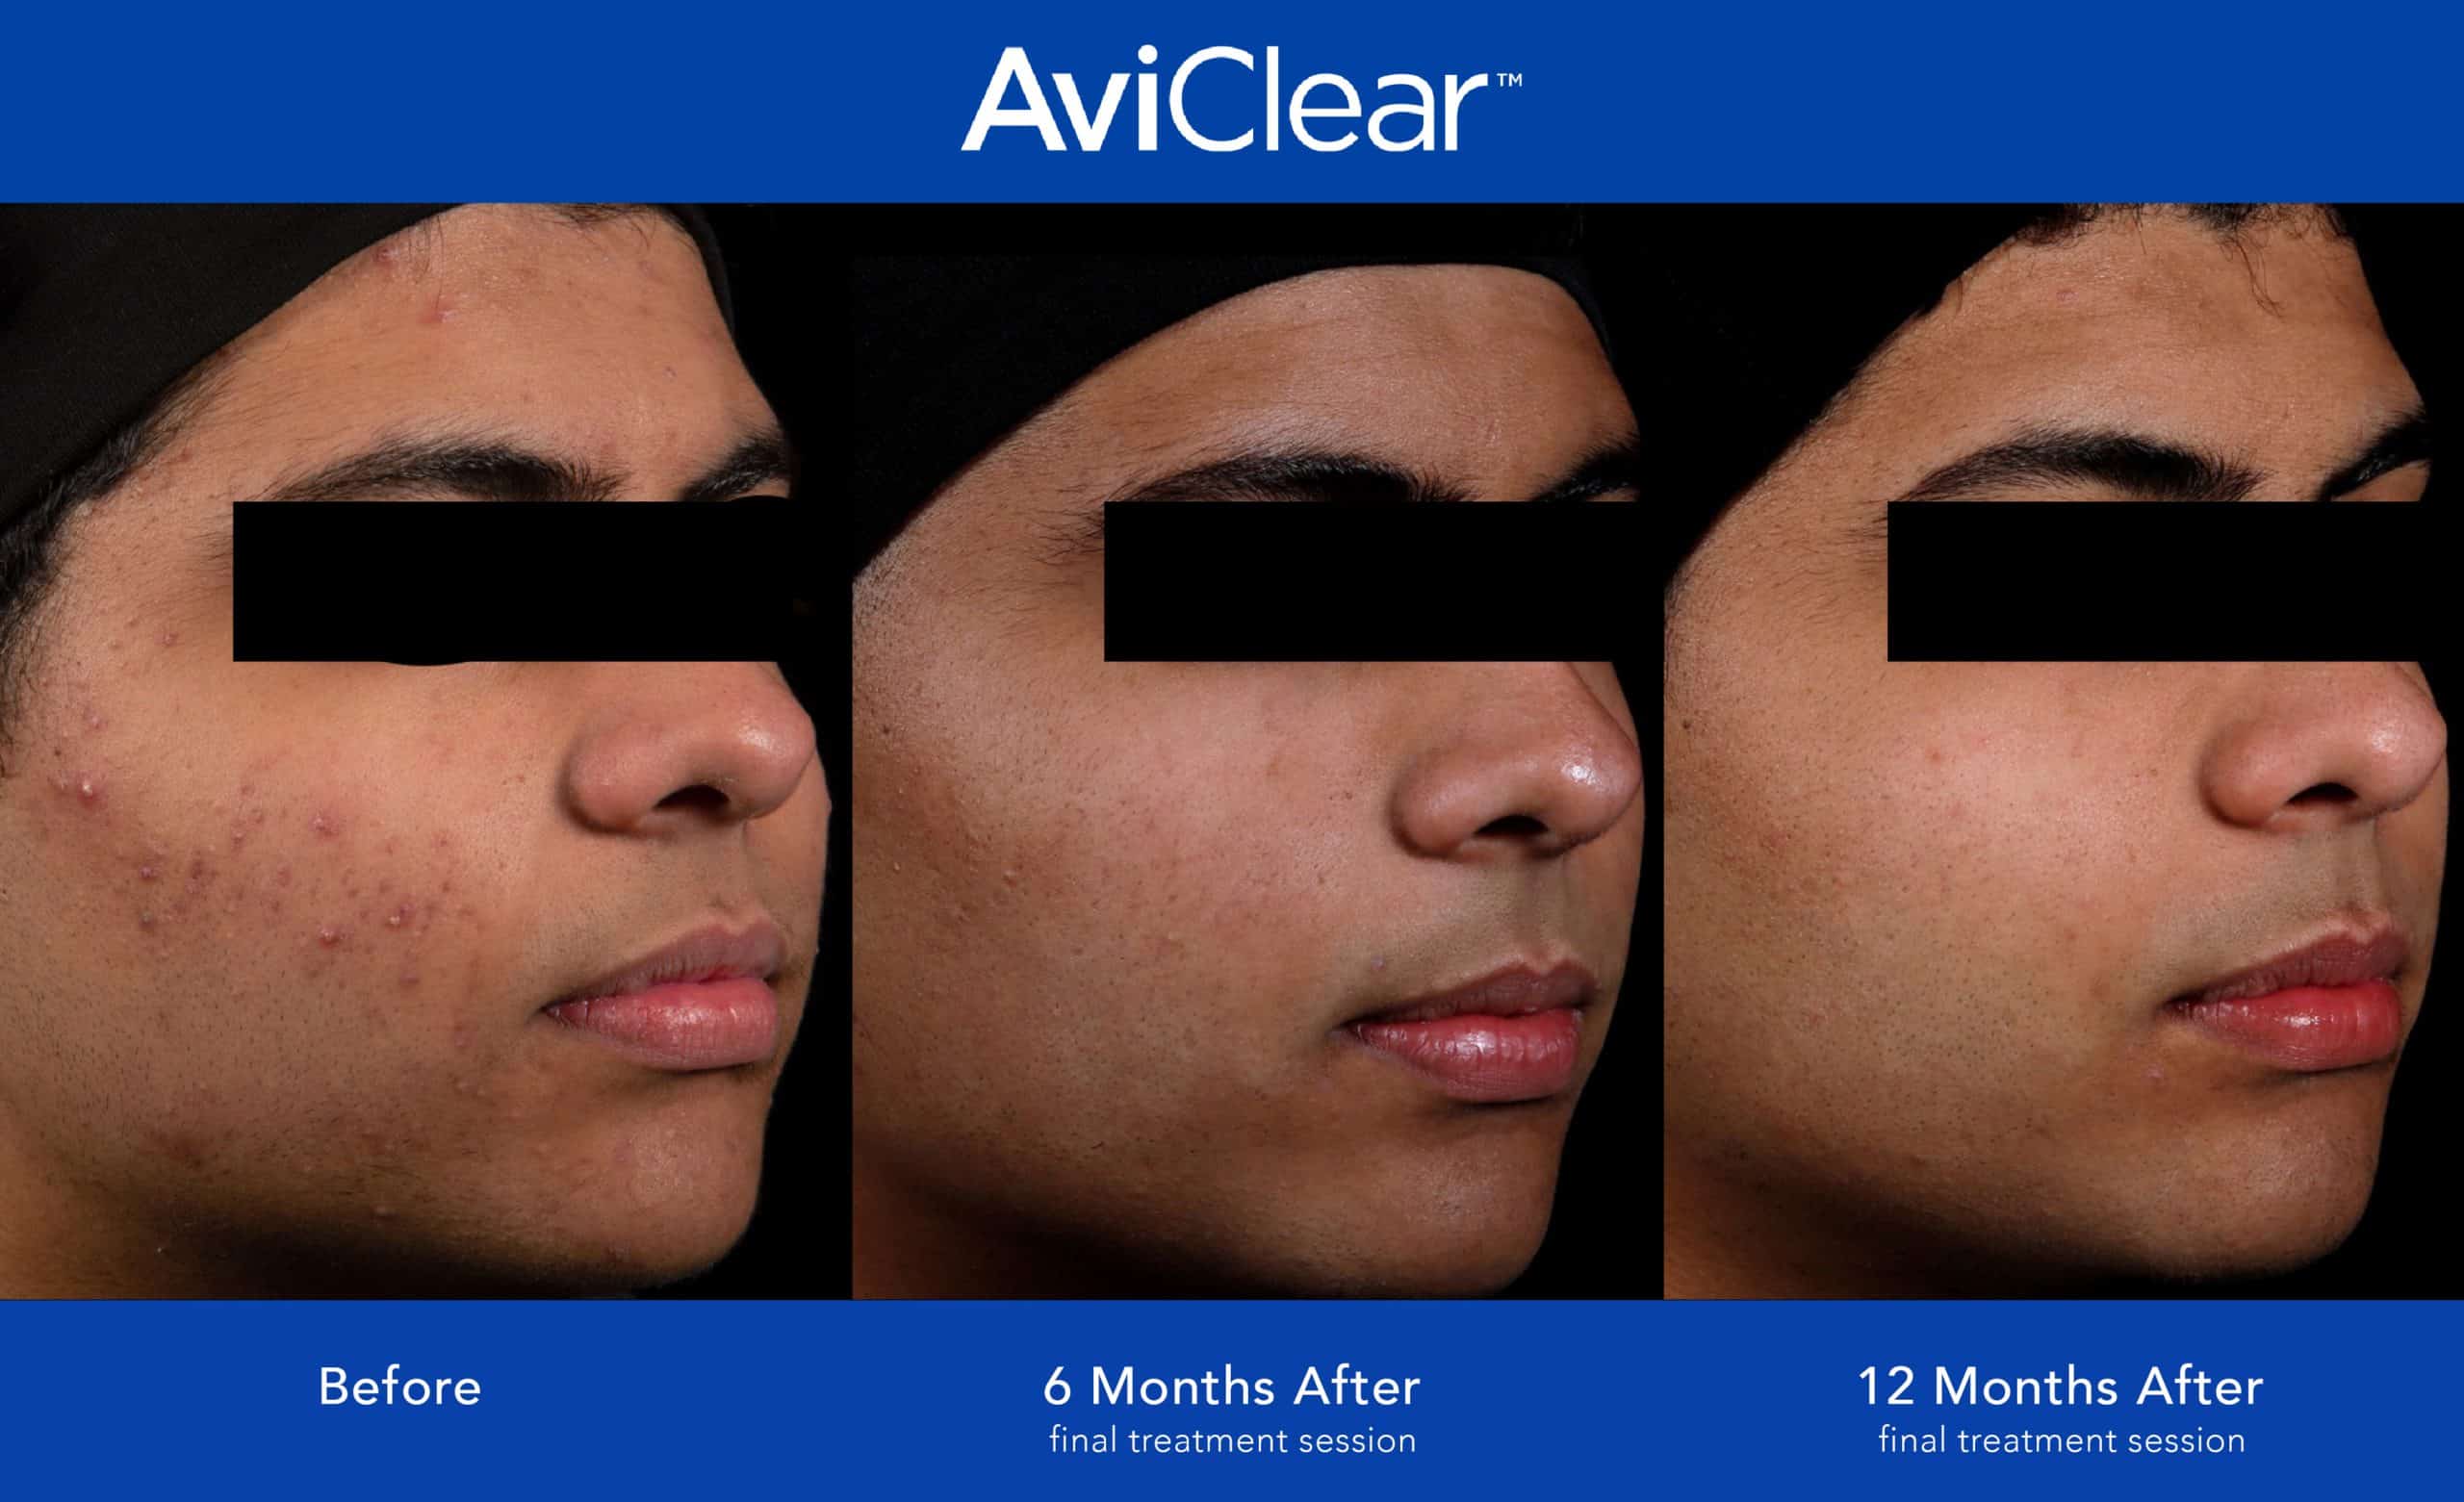 An image showing a before and after the result of AviClear acne treatment in Newtown Square, PA